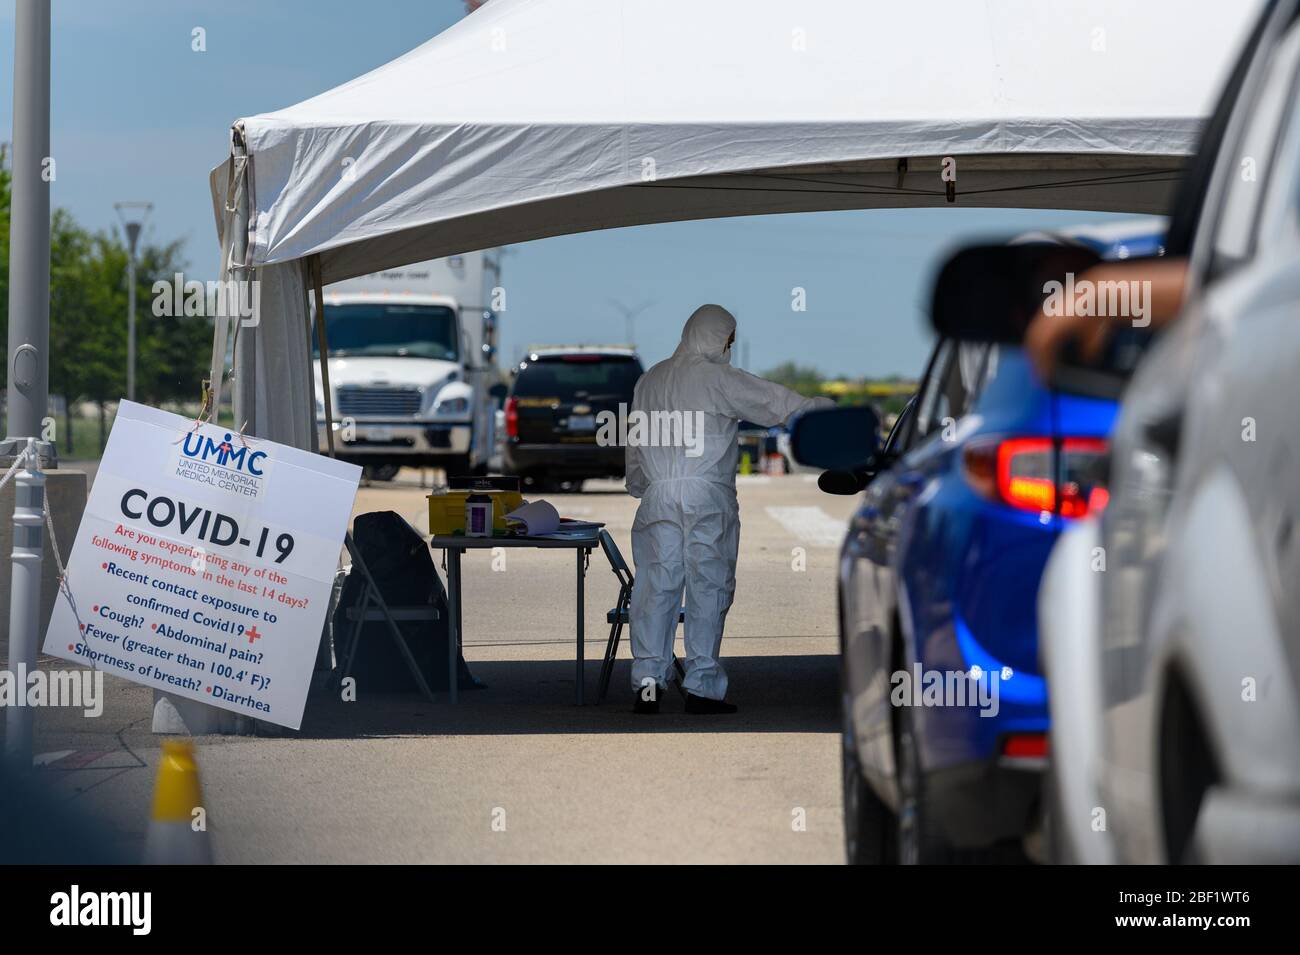 Sugar Land, Texas - April 16, 2020: Dressed in full protective gear a healthcare worker collects information from people sitting inside their car at t Stock Photo